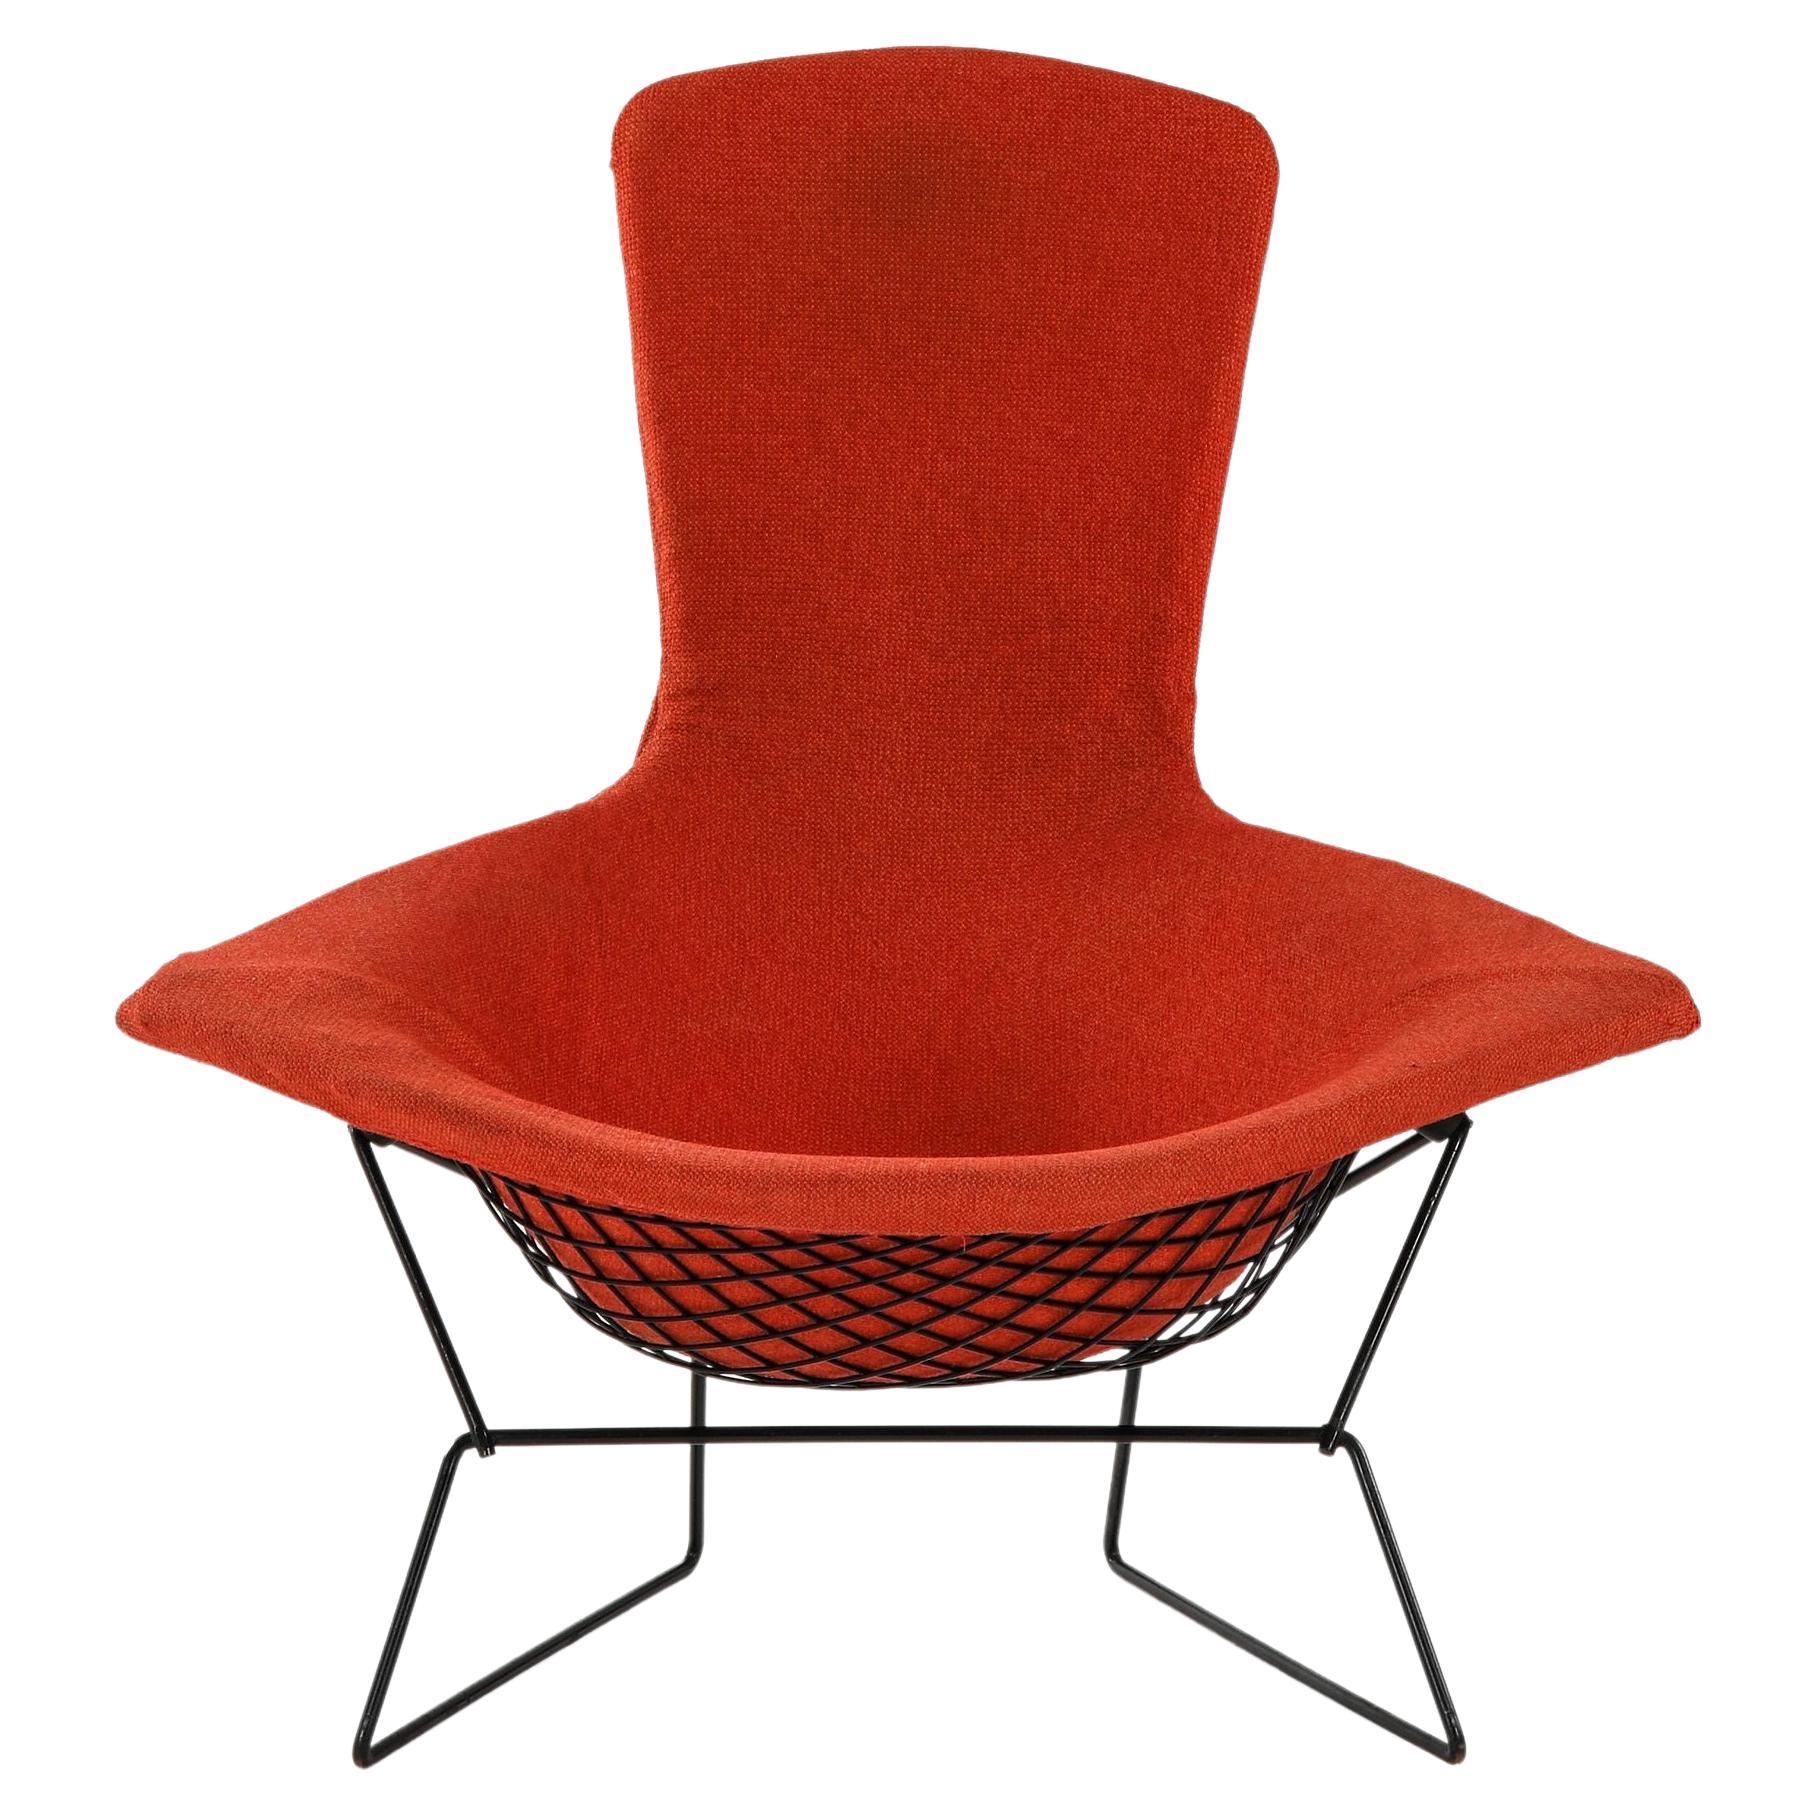 Easy Bird Chair in Black Lacquered Metal and Red Fabric by Harry Bertoia, 1950s For Sale